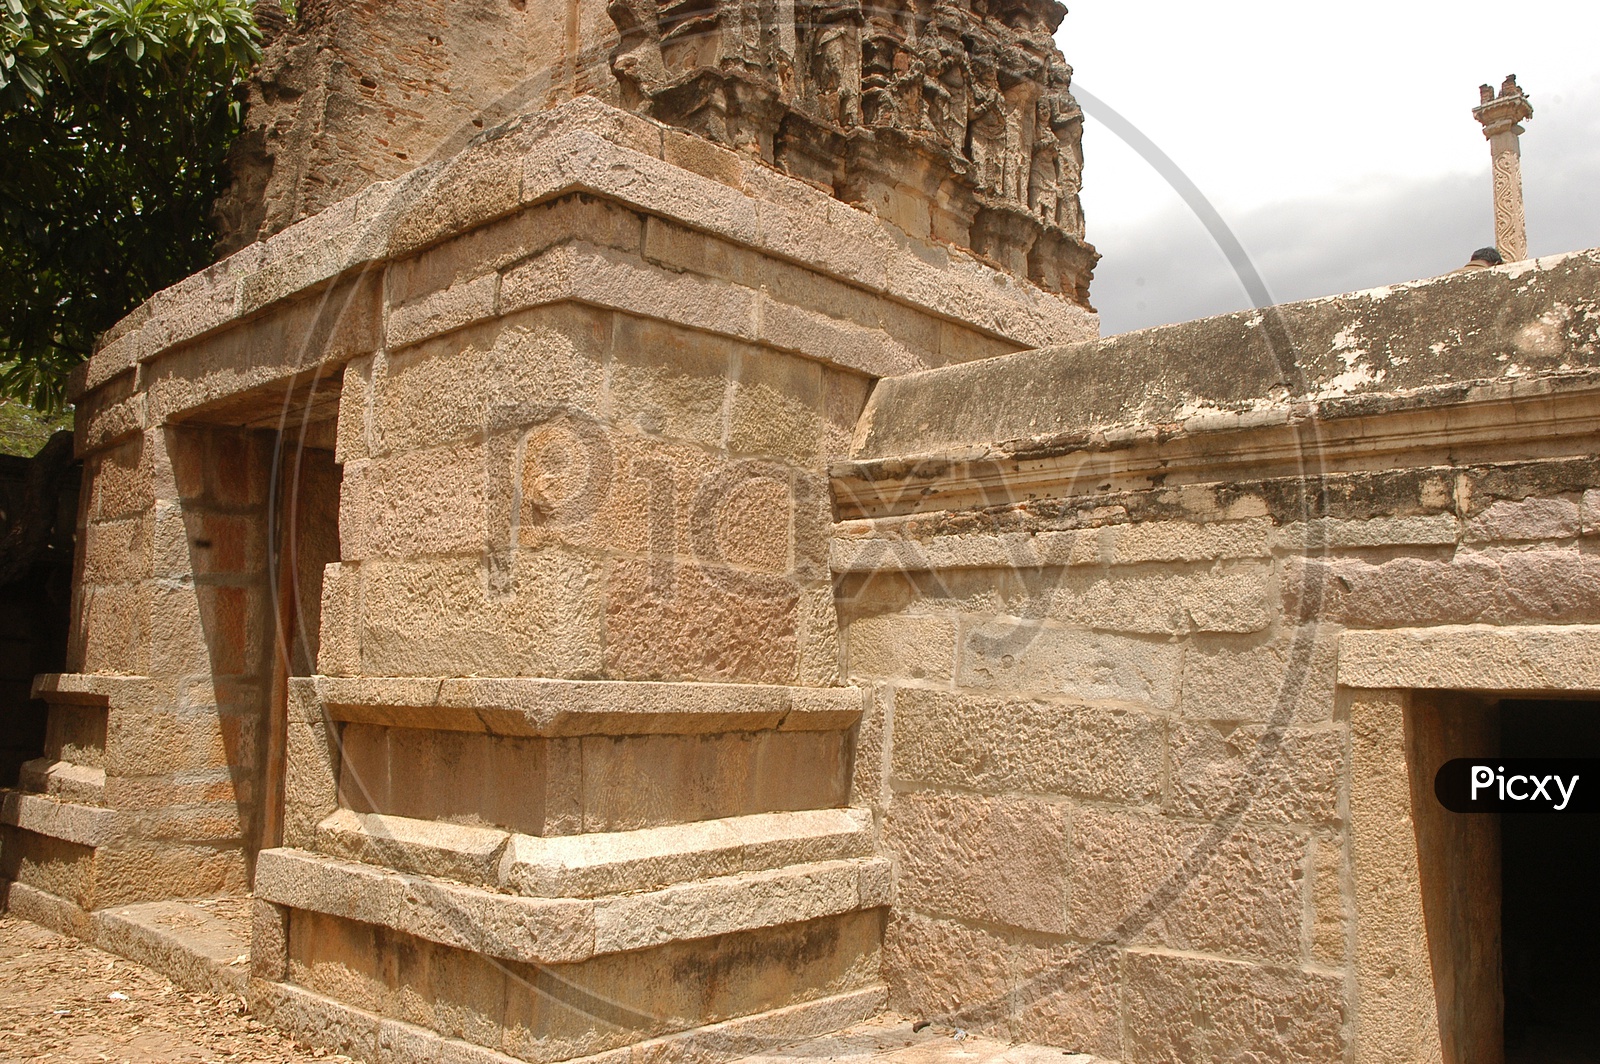 Stone carvings on the temple